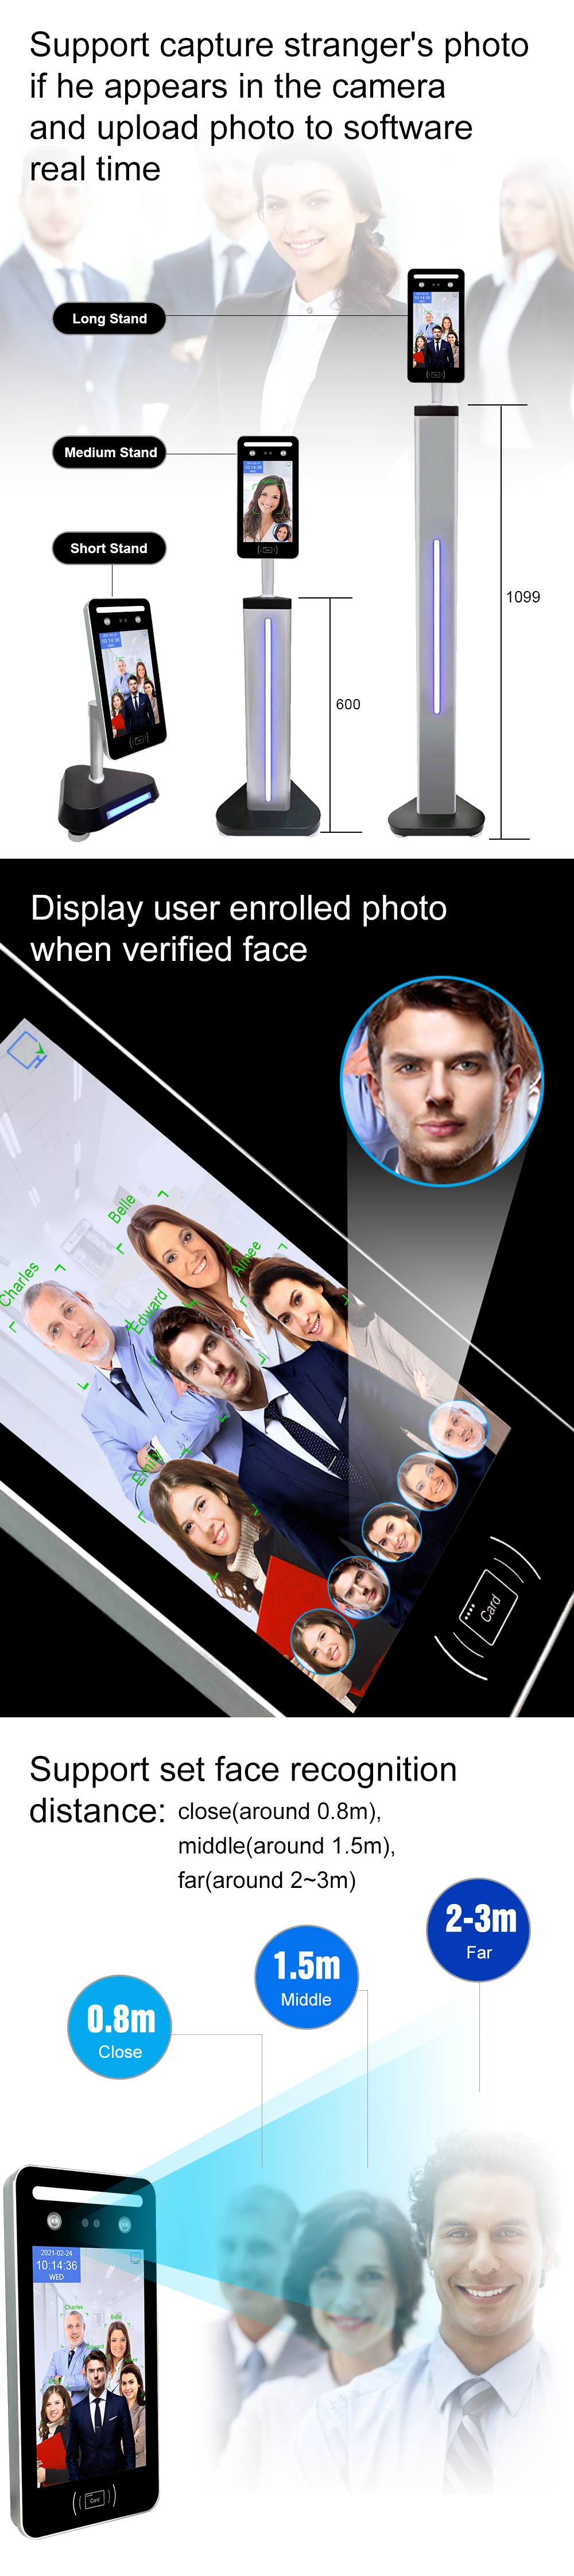 Excelsoo Dynamic Face Recognition Terminal ADR08